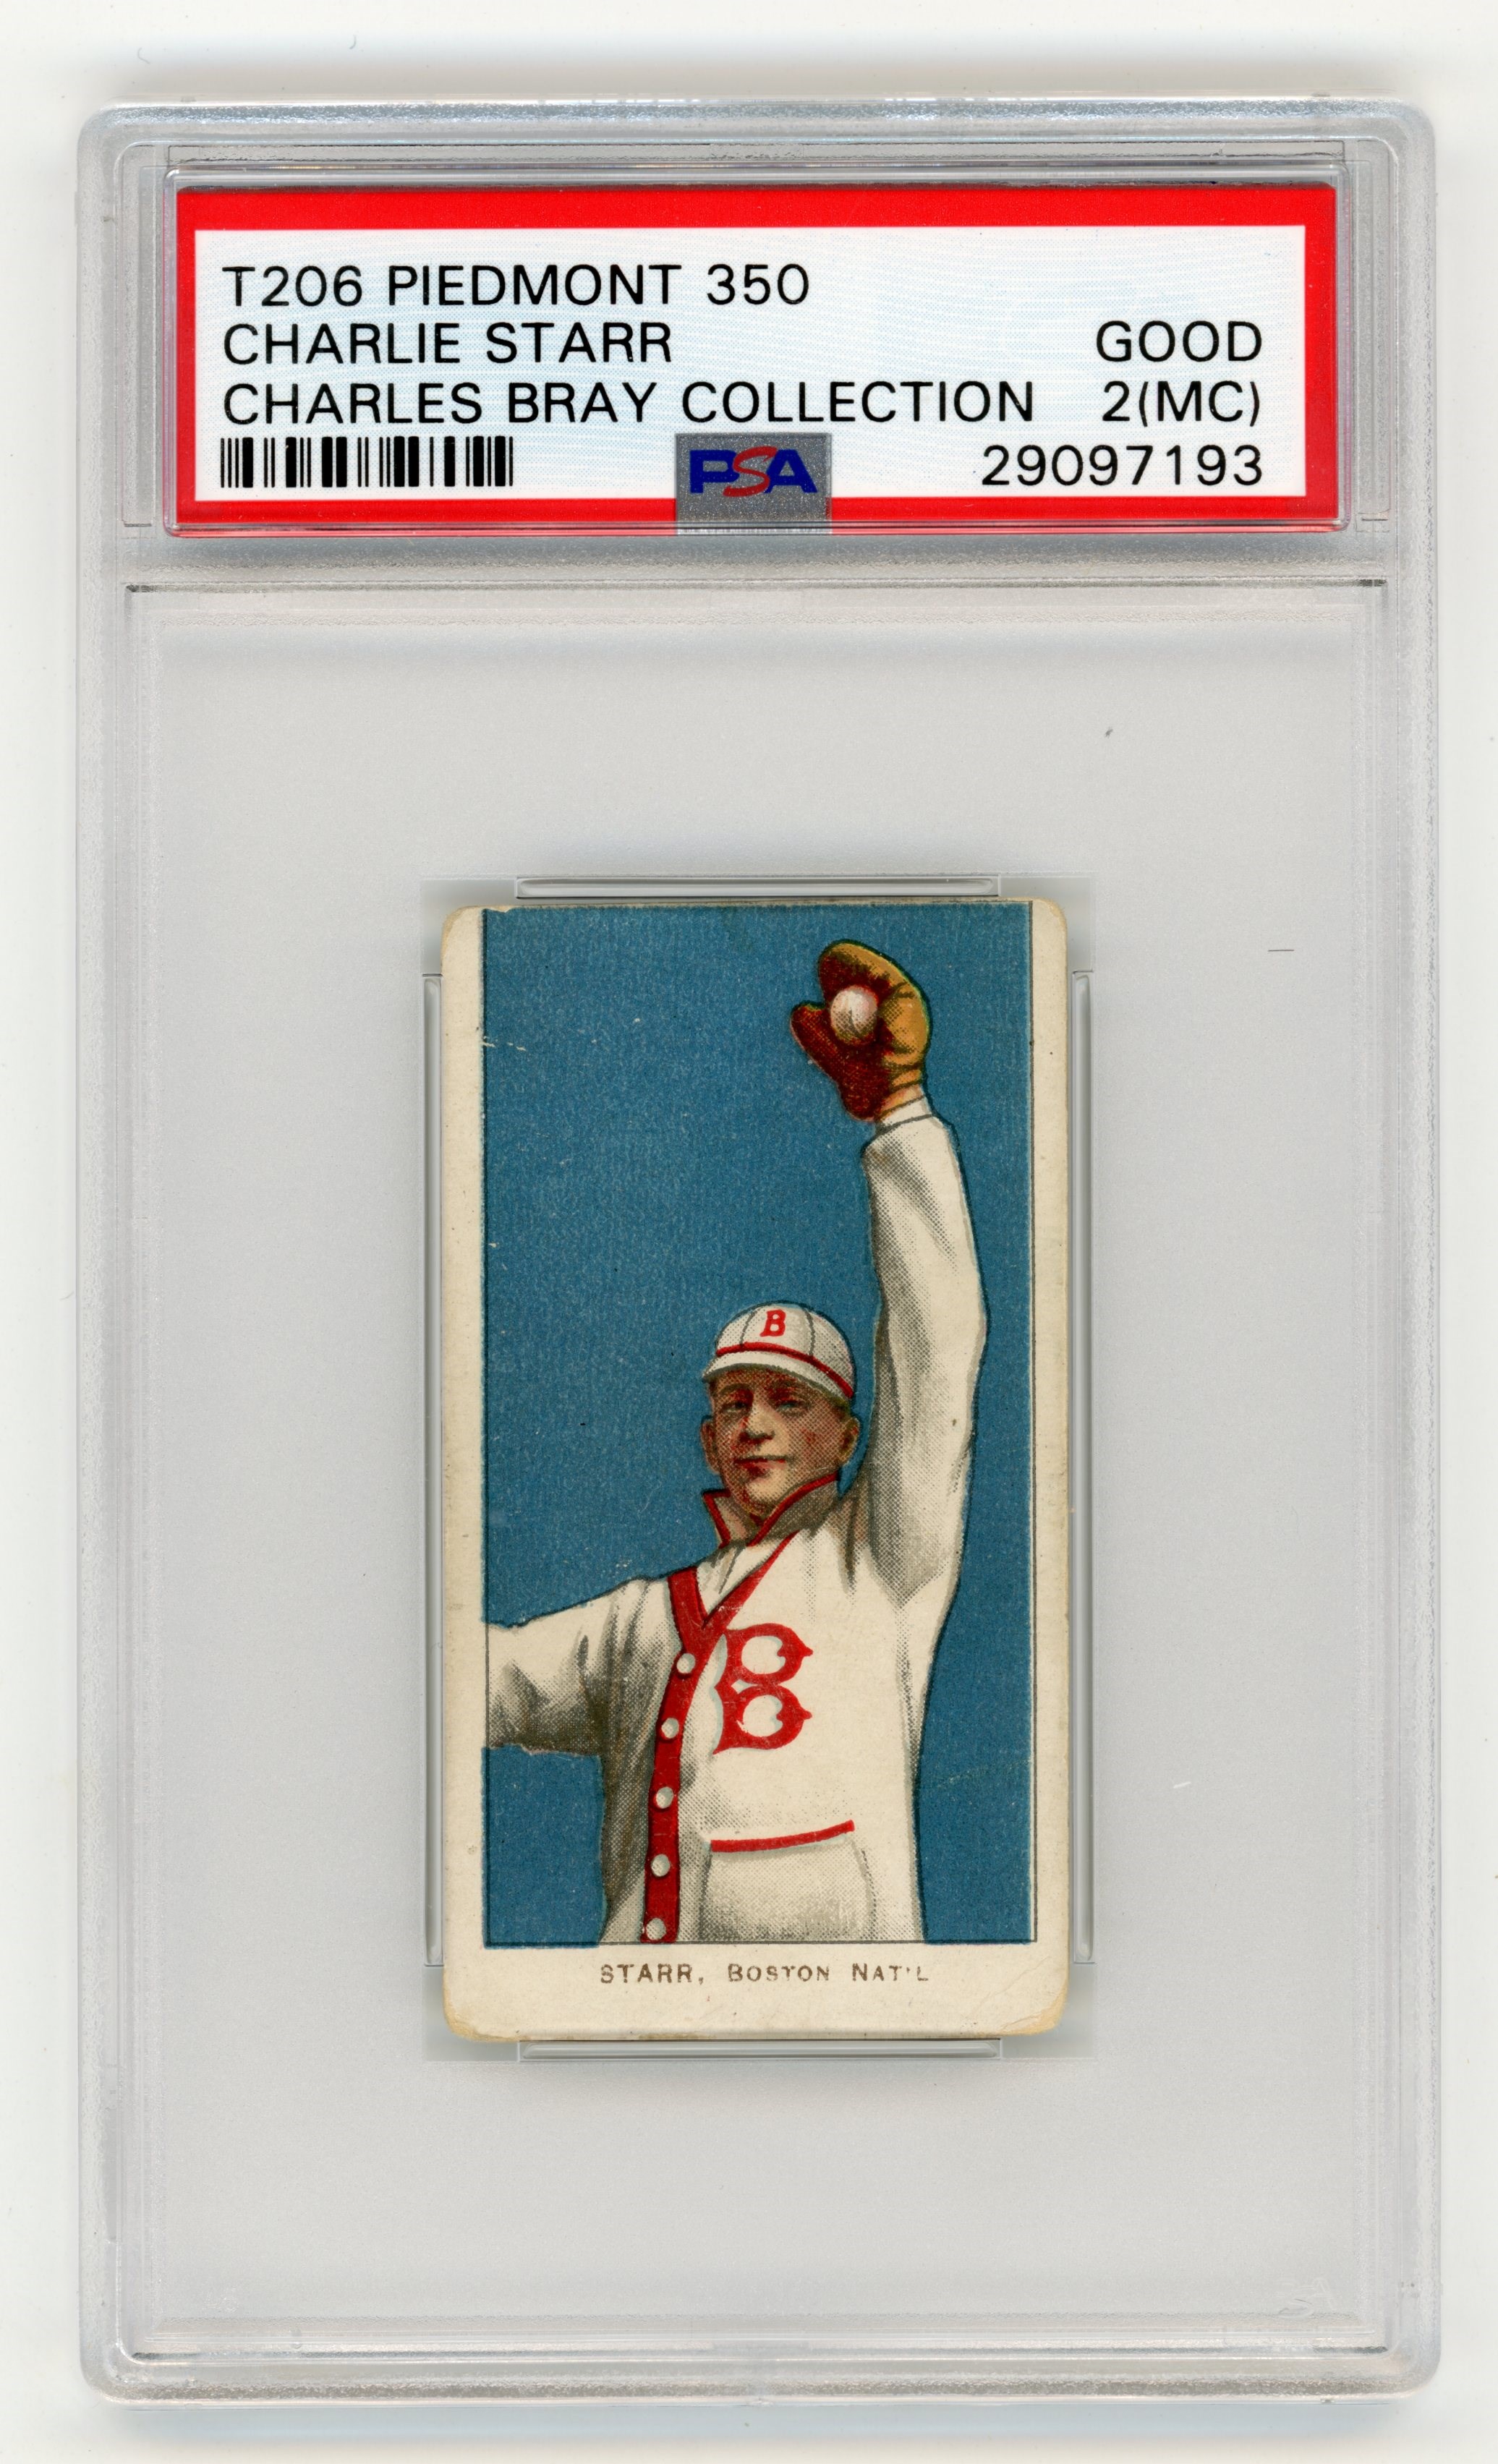 T206 Piedmont 350 Charlie Starr  PSA GOOD 2 (MC) From the Charles Bray Collection.